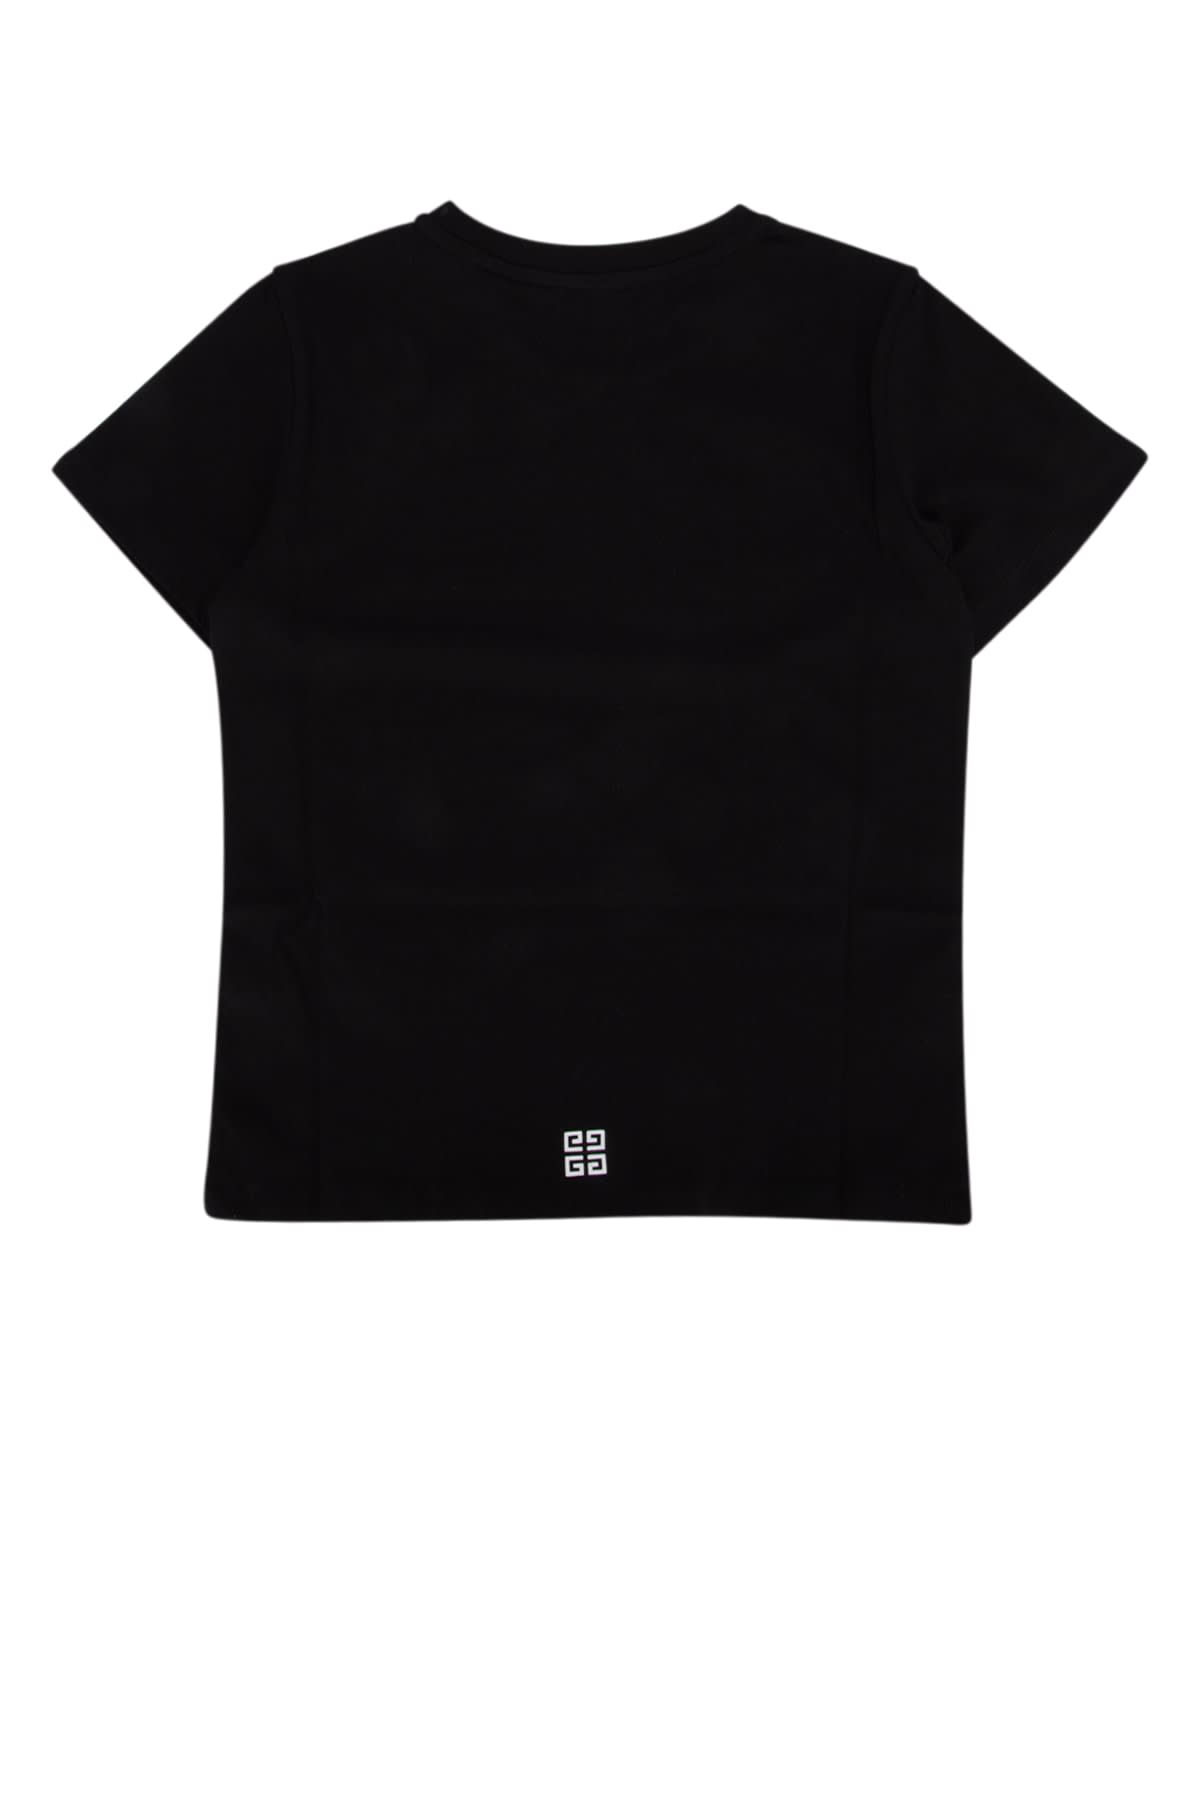 Givenchy Kids' T-shirt In Black